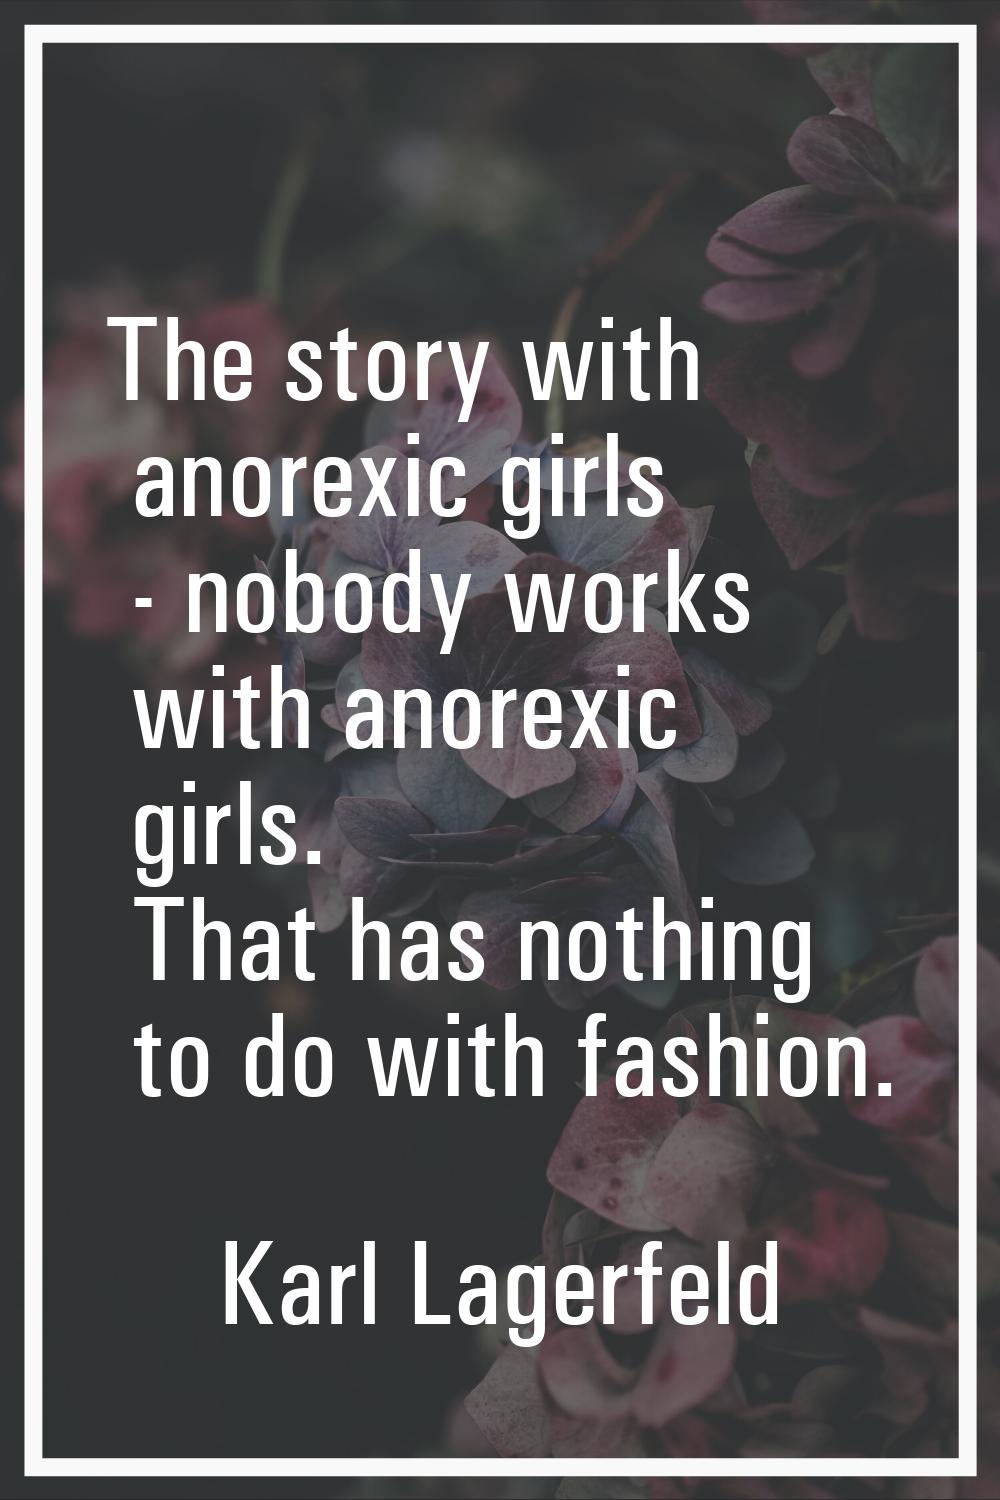 The story with anorexic girls - nobody works with anorexic girls. That has nothing to do with fashi